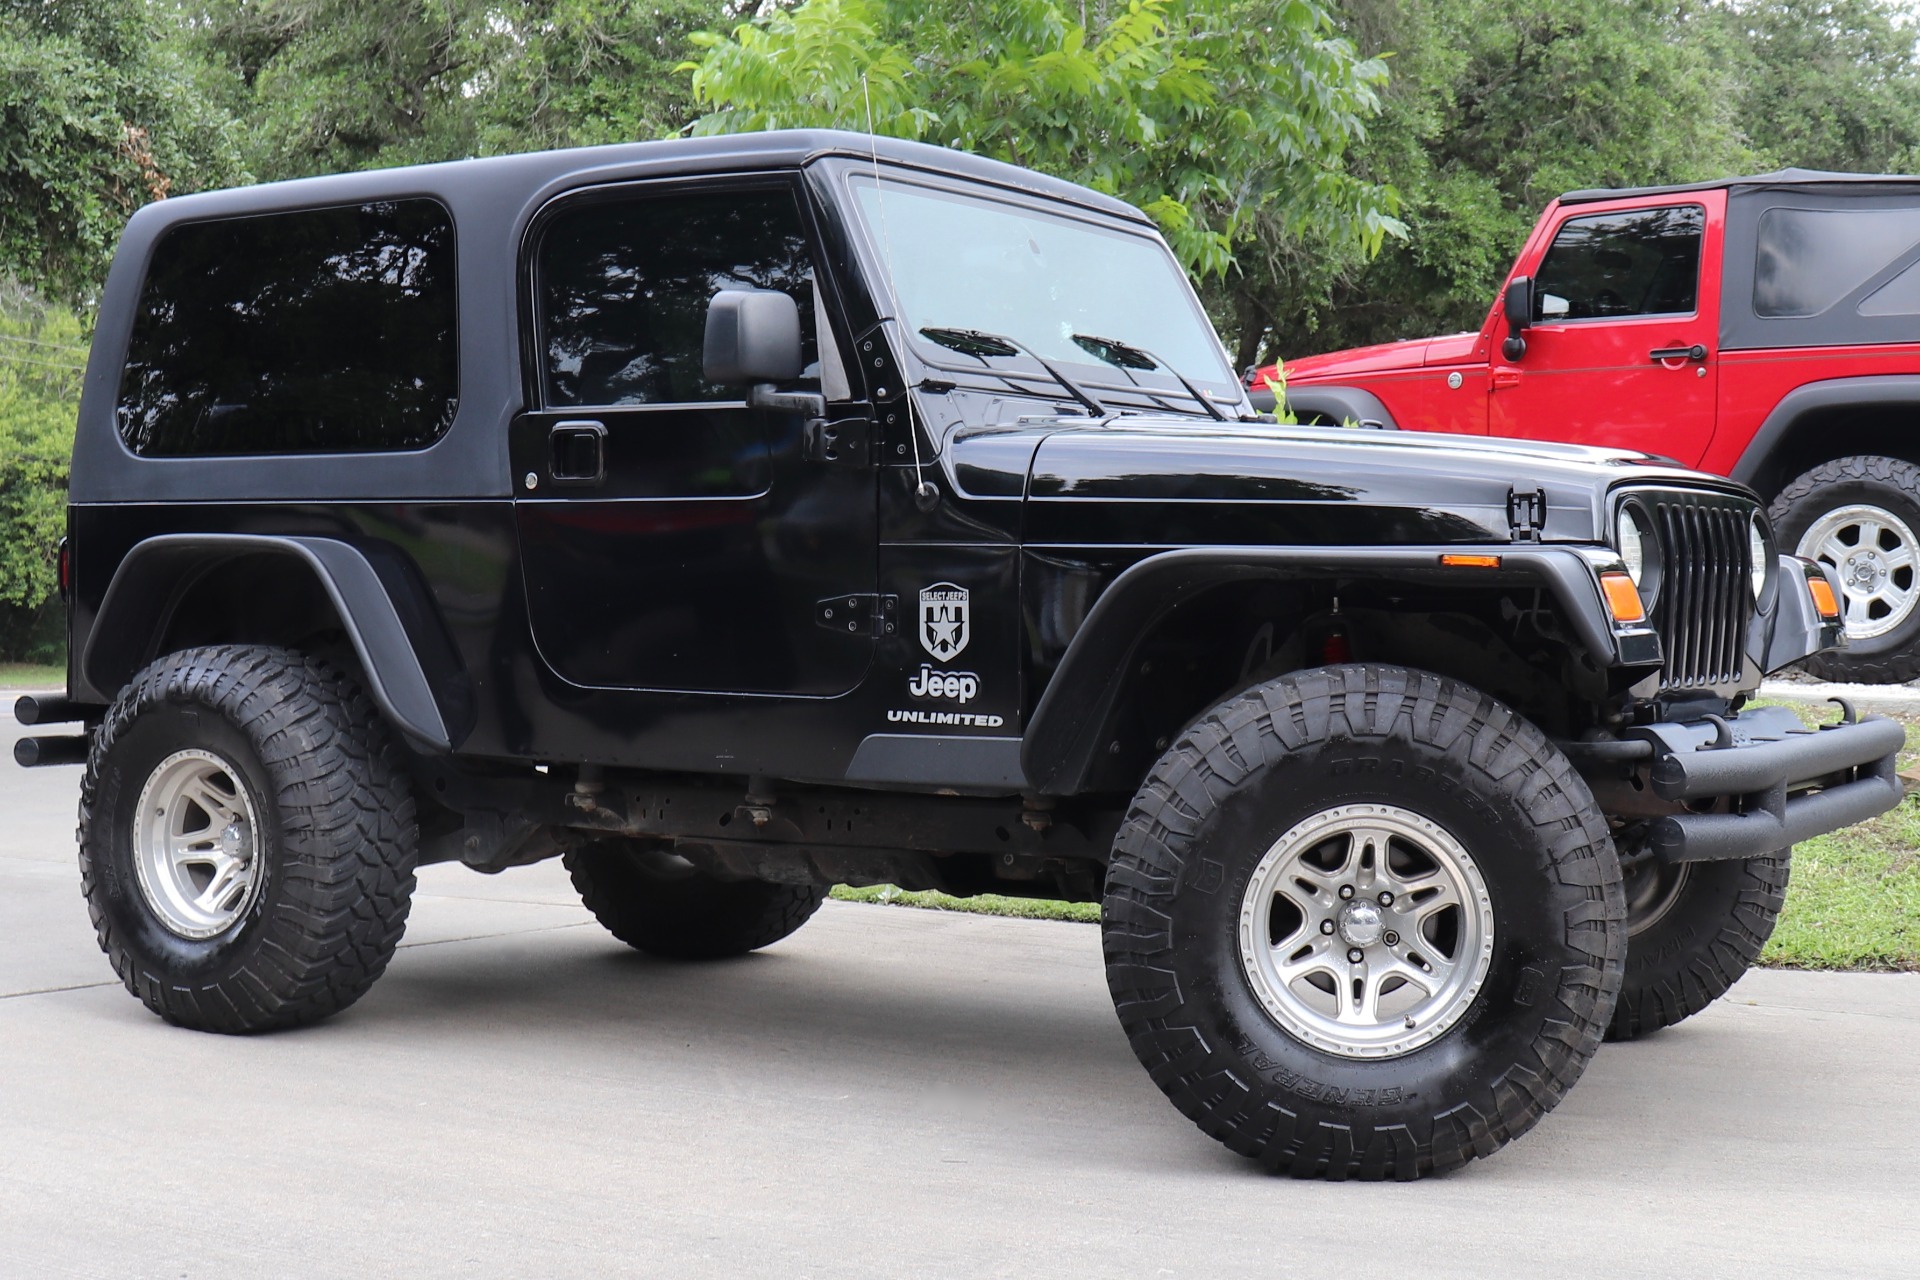 Used 2006 Jeep Wrangler Unlimited For Sale ($21,995) | Select Jeeps Inc.  Stock #771358